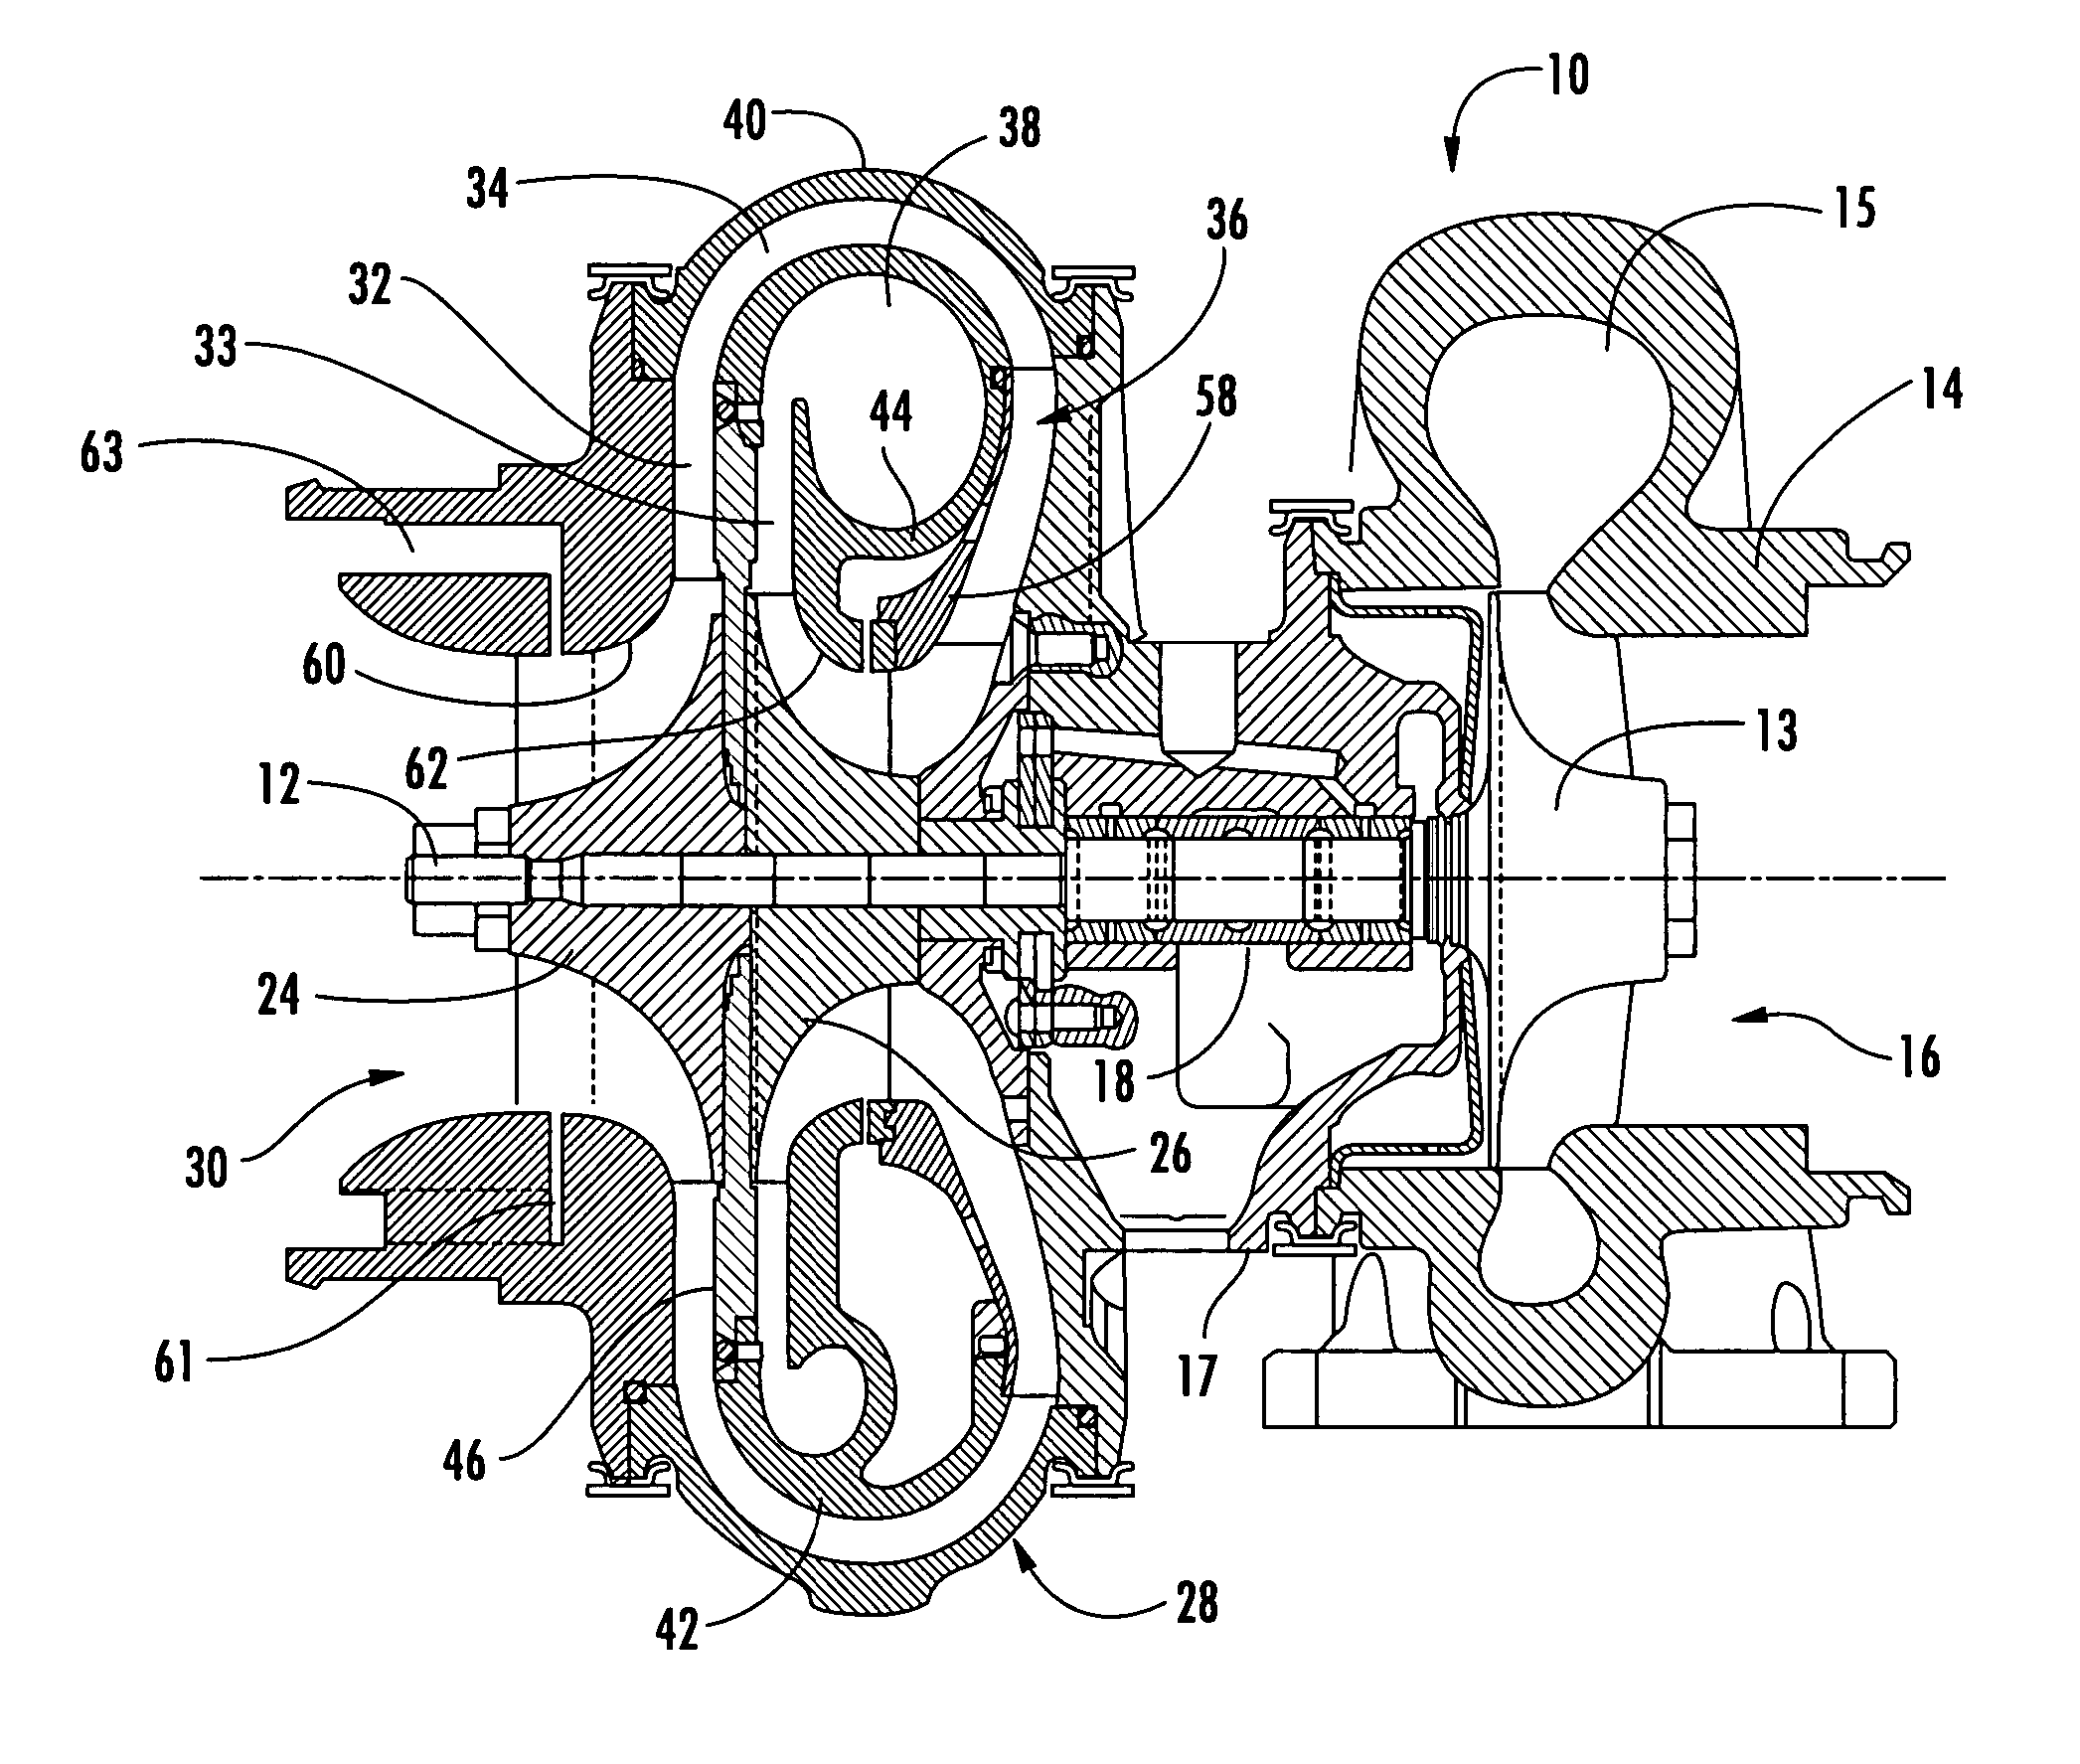 Turbocharger compressor having ported second-stage shroud, and associated method